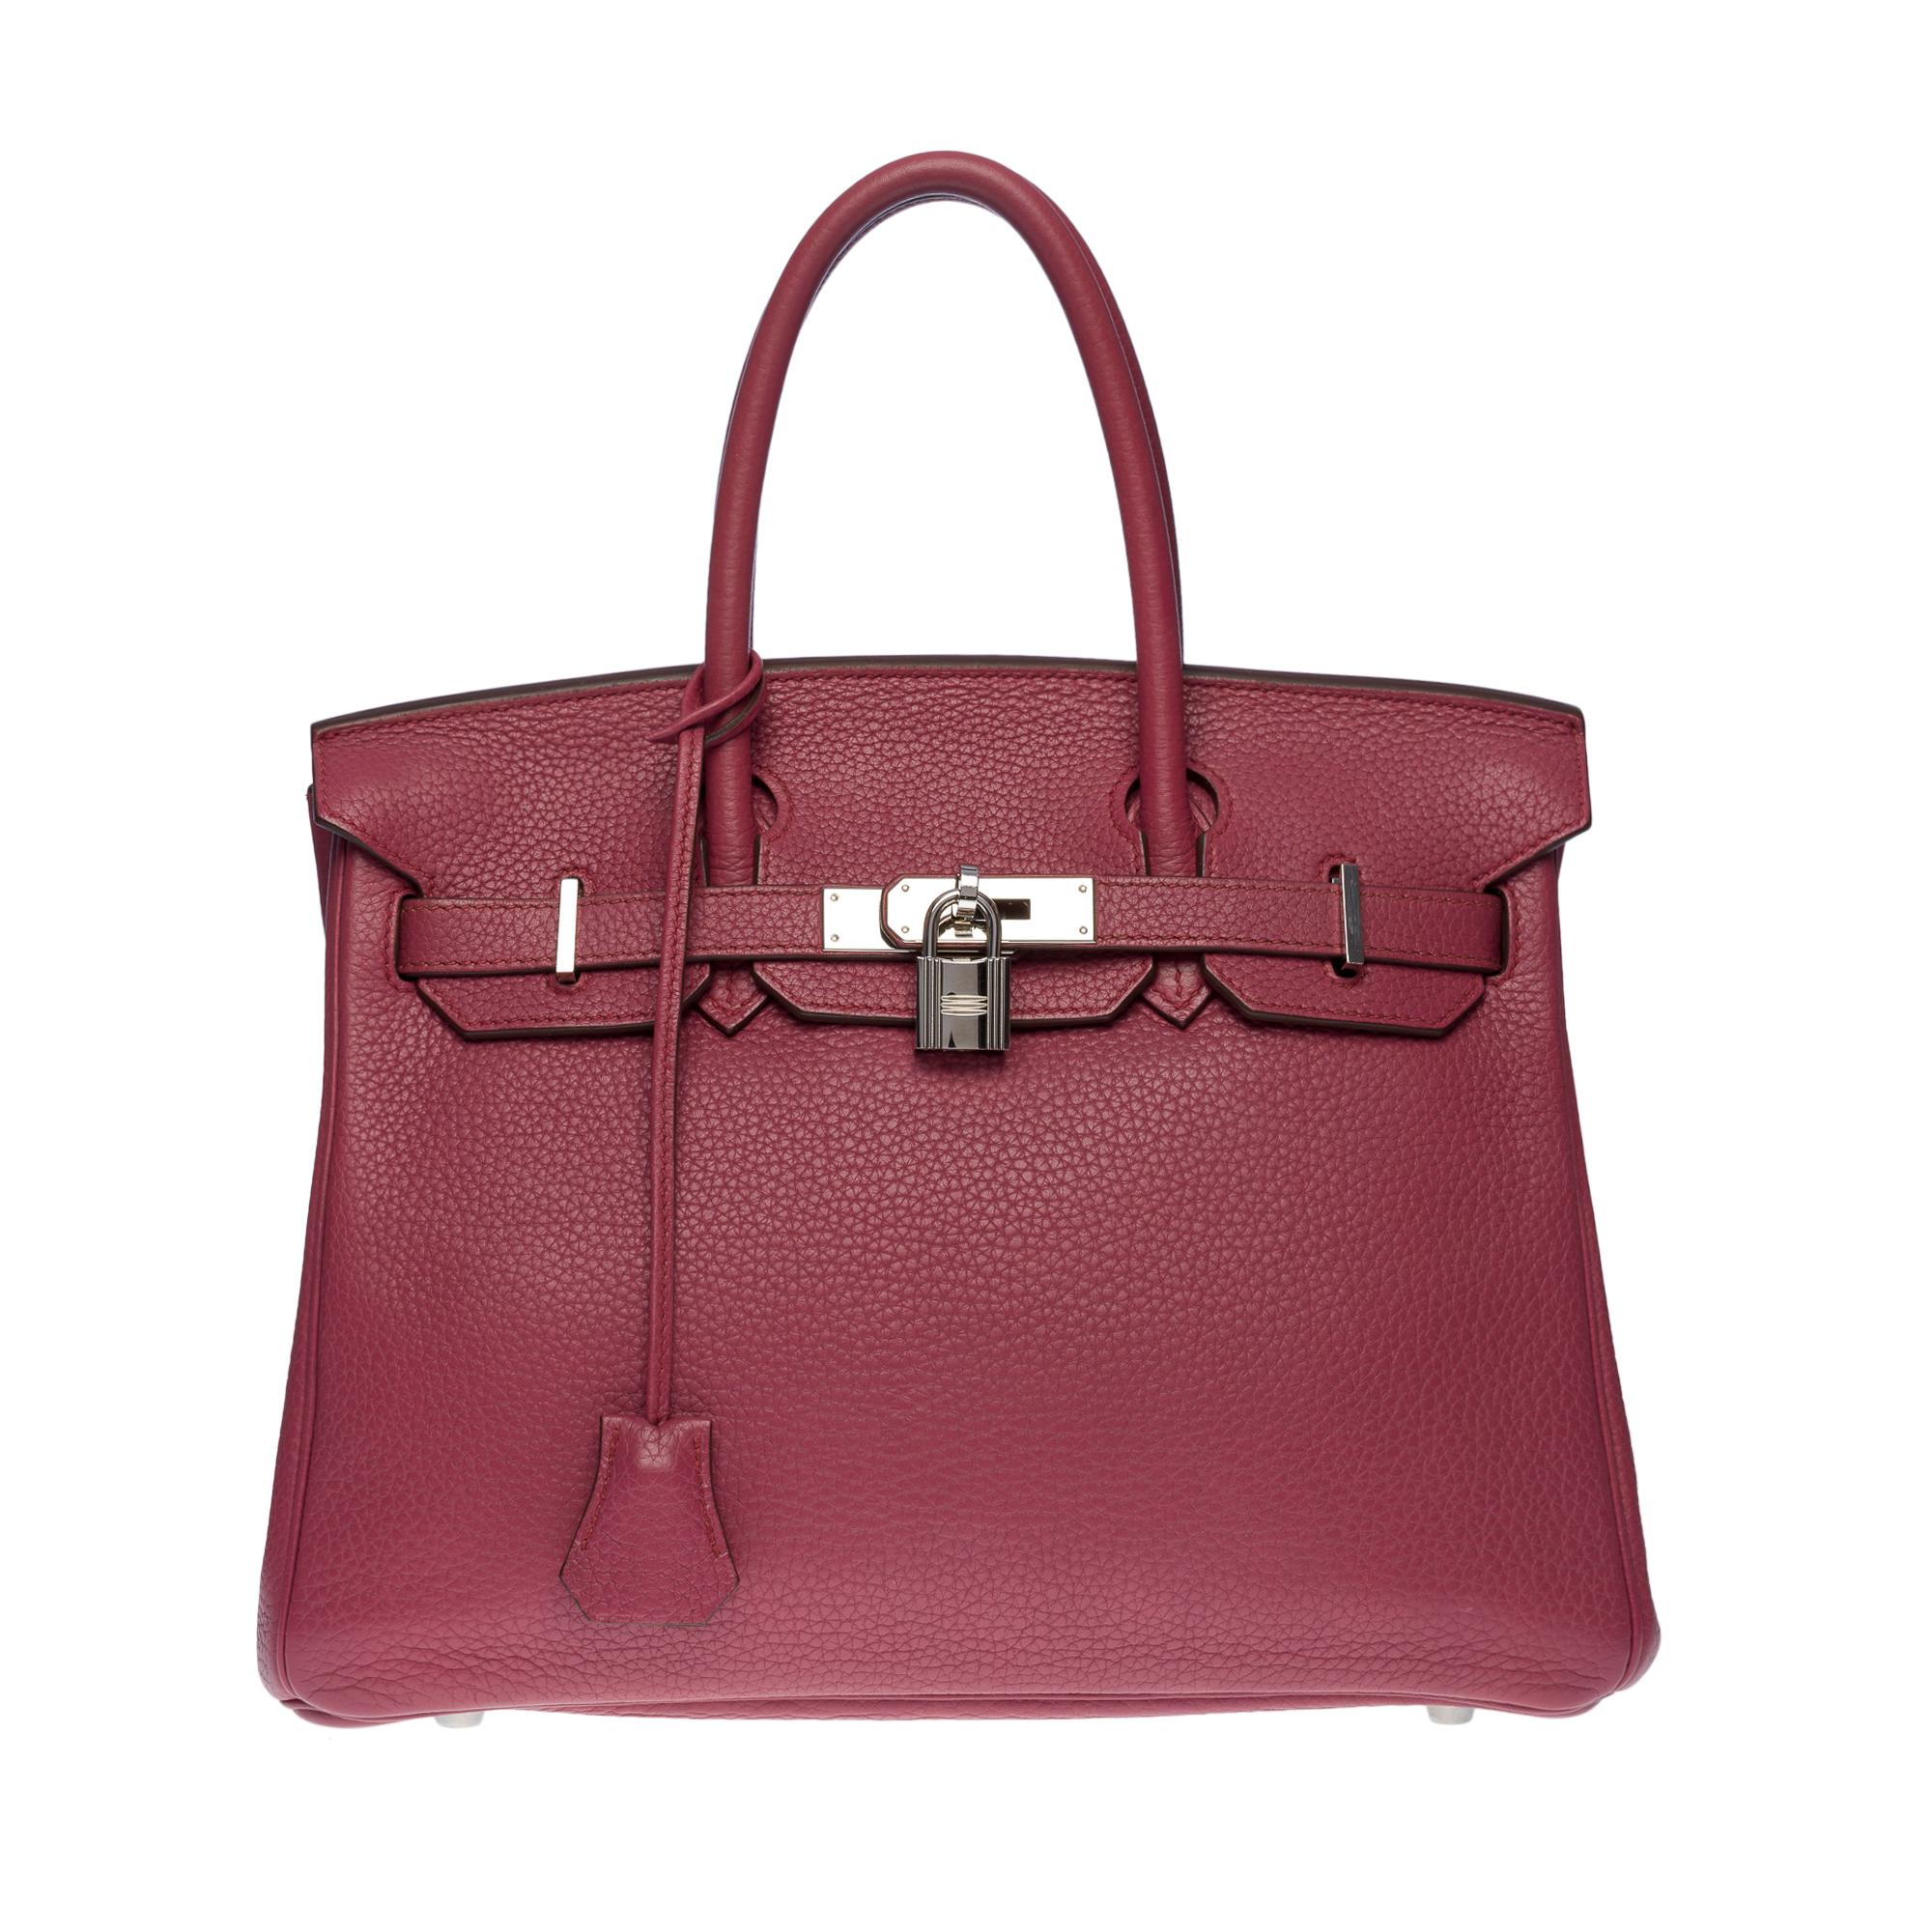 Exquisite Hermes Birkin 30 handbag in bois de rose Togo leather, palladium silver metal hardware, double handle in bois de rose leather allowing a hand-carried

Flap closure
Inside lining in towed leather, one zippered pocket, one patch